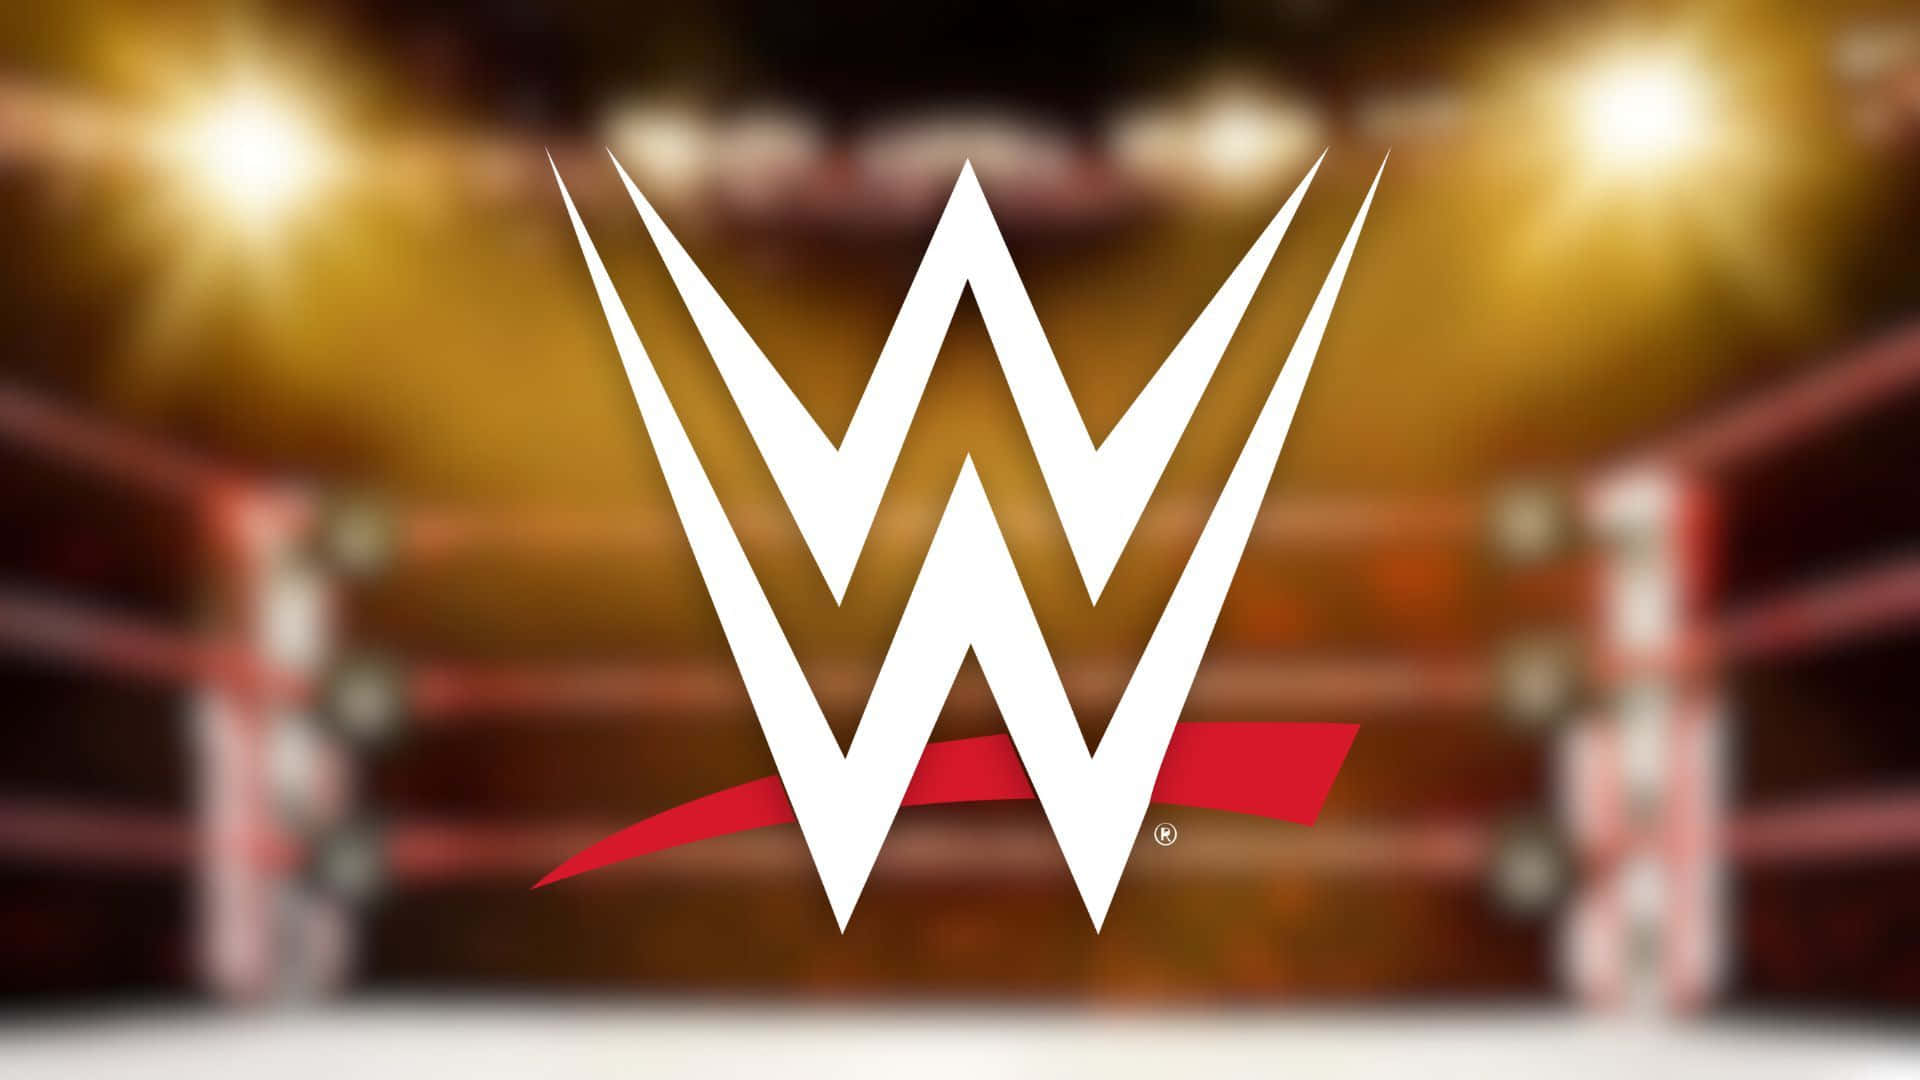 Download WWE Logo: The Iconic Symbol of World Wrestling Entertainment  Wallpaper | Wallpapers.com